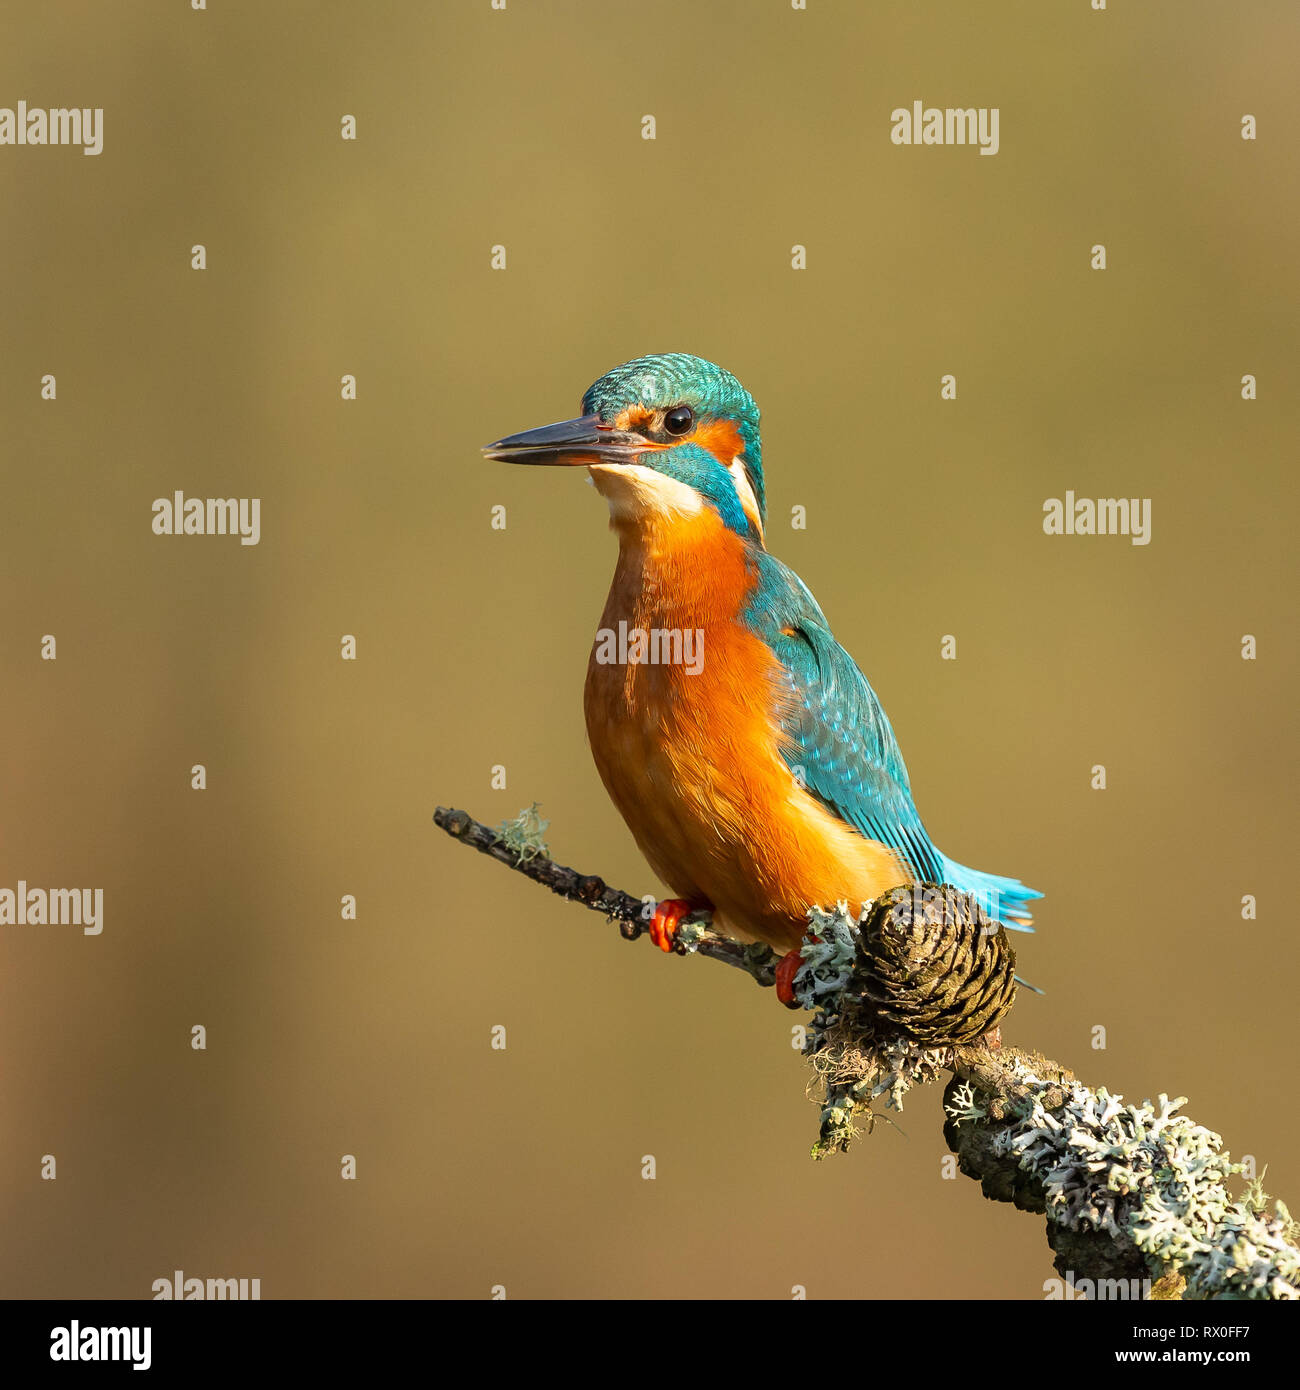 A male kingfisher (Alcedo atthis) perched on a branch in the sun Stock Photo